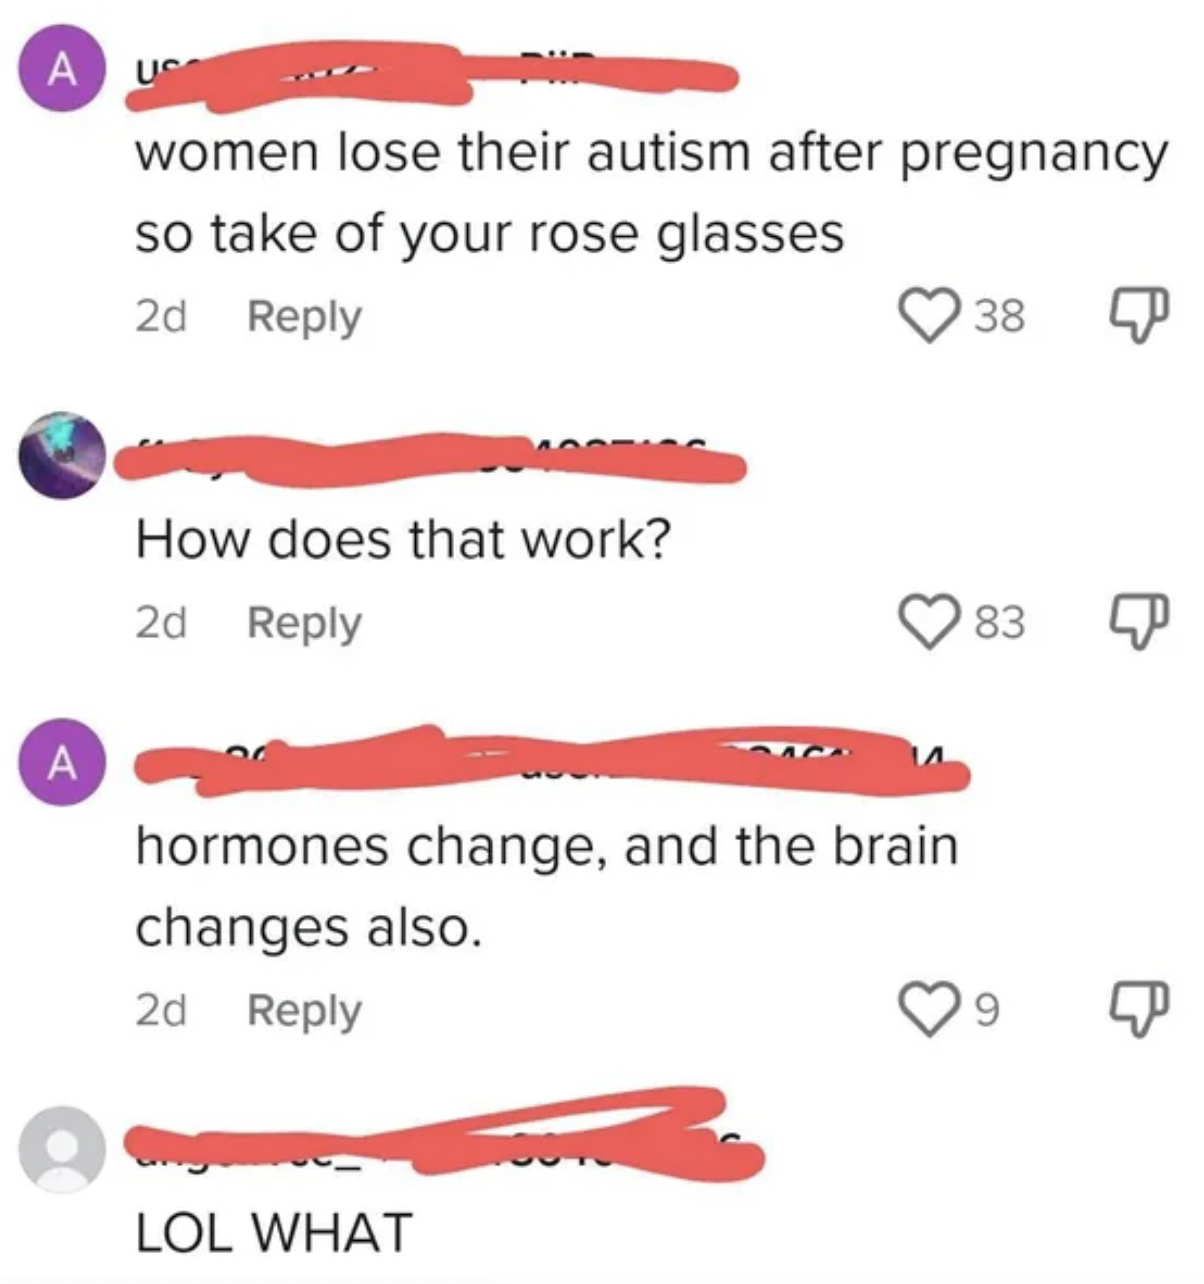 diagram - A Us women lose their autism after pregnancy so take of your rose glasses 2d A How does that work? 2d hormones change, and the brain changes also.